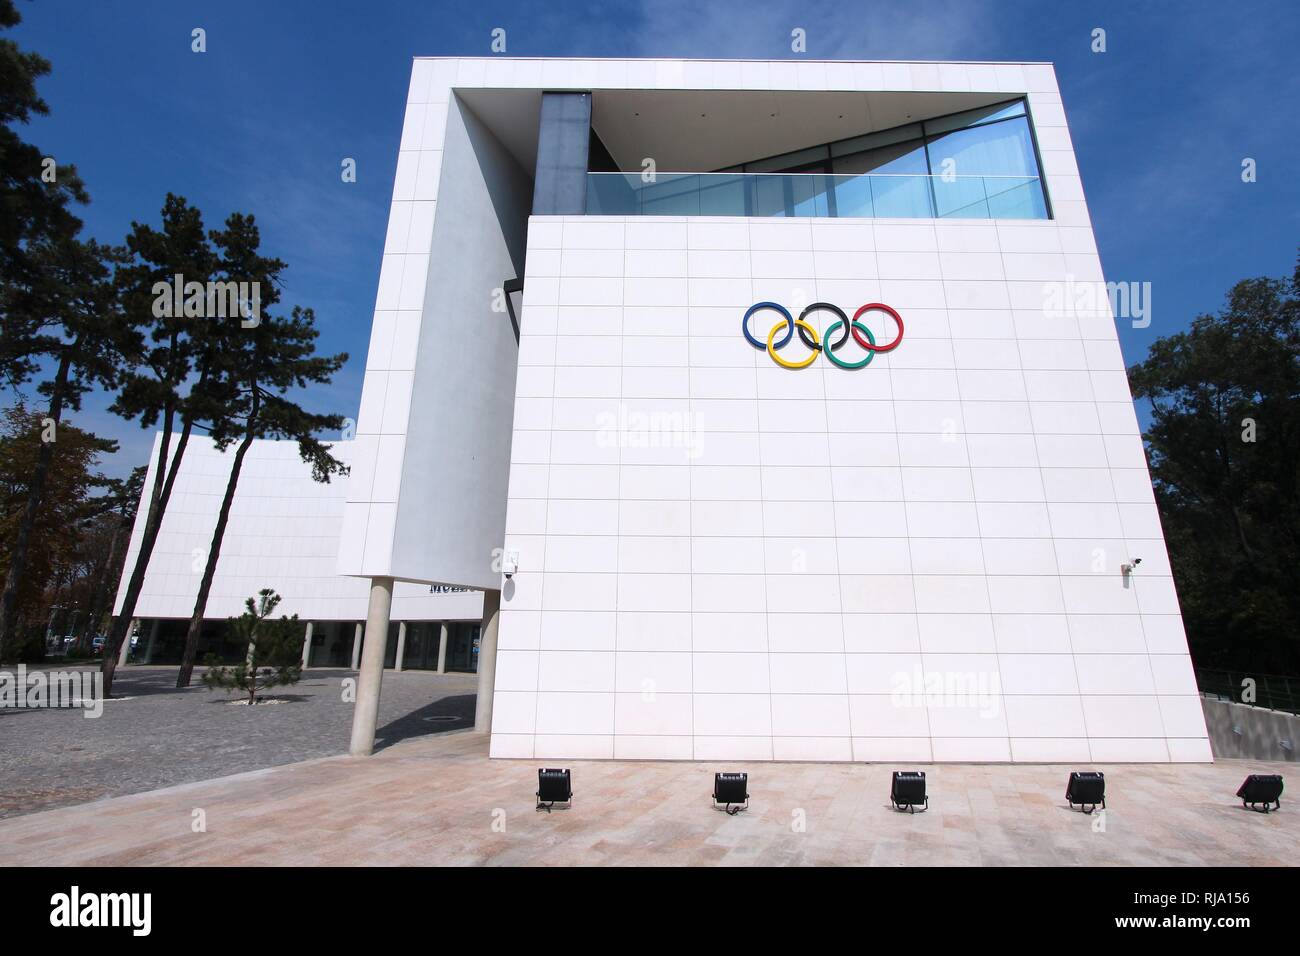 BUCHAREST, ROMANIA - AUGUST 19: Romanian Olympic Committee building on August 19, 2012 in Bucharest, Romania. The beautiful contemporary building was  Stock Photo